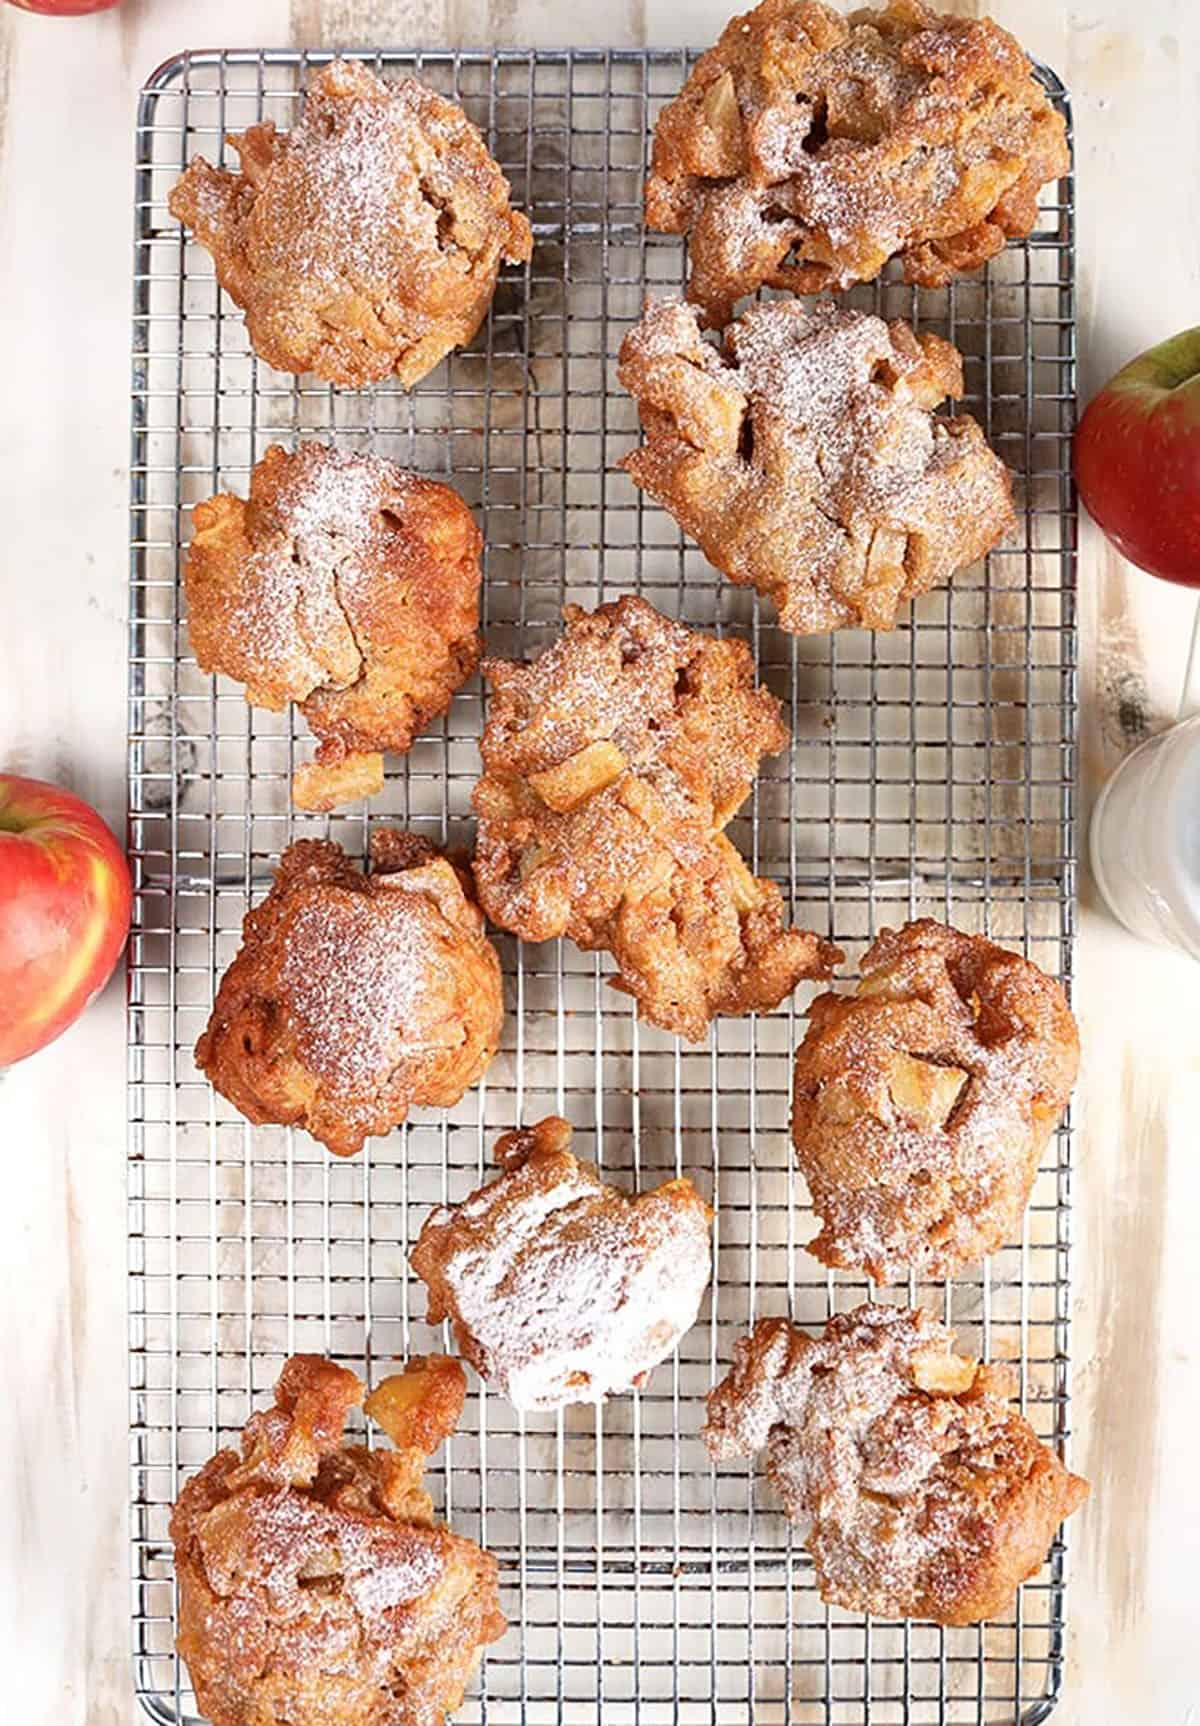 Apple fritters on a cooling rack on a rustic white background with apples